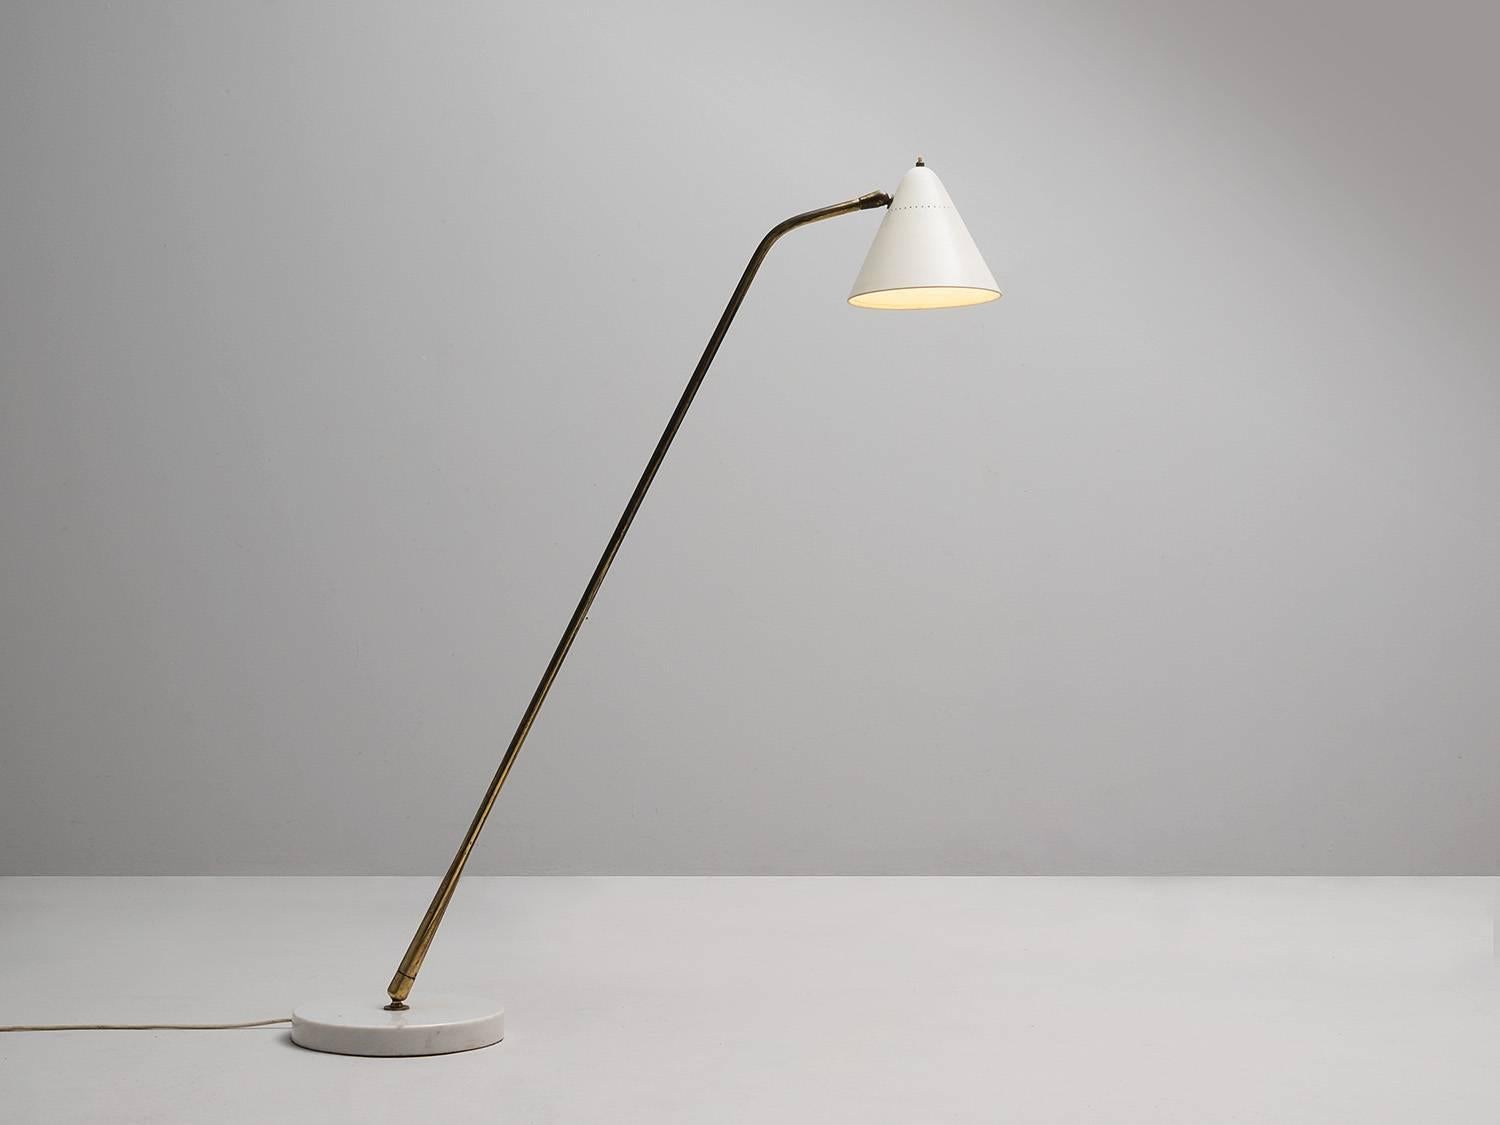 Extremely rare floor lamp by Giuseppe Ostuni for O-Luce, Italy, 1950s.

Wonderful floor lamp in nicely aged brass and white marble, with a beautiful original off-white shade.

The bras stem is adjustable in angle, as well as the shade. The round